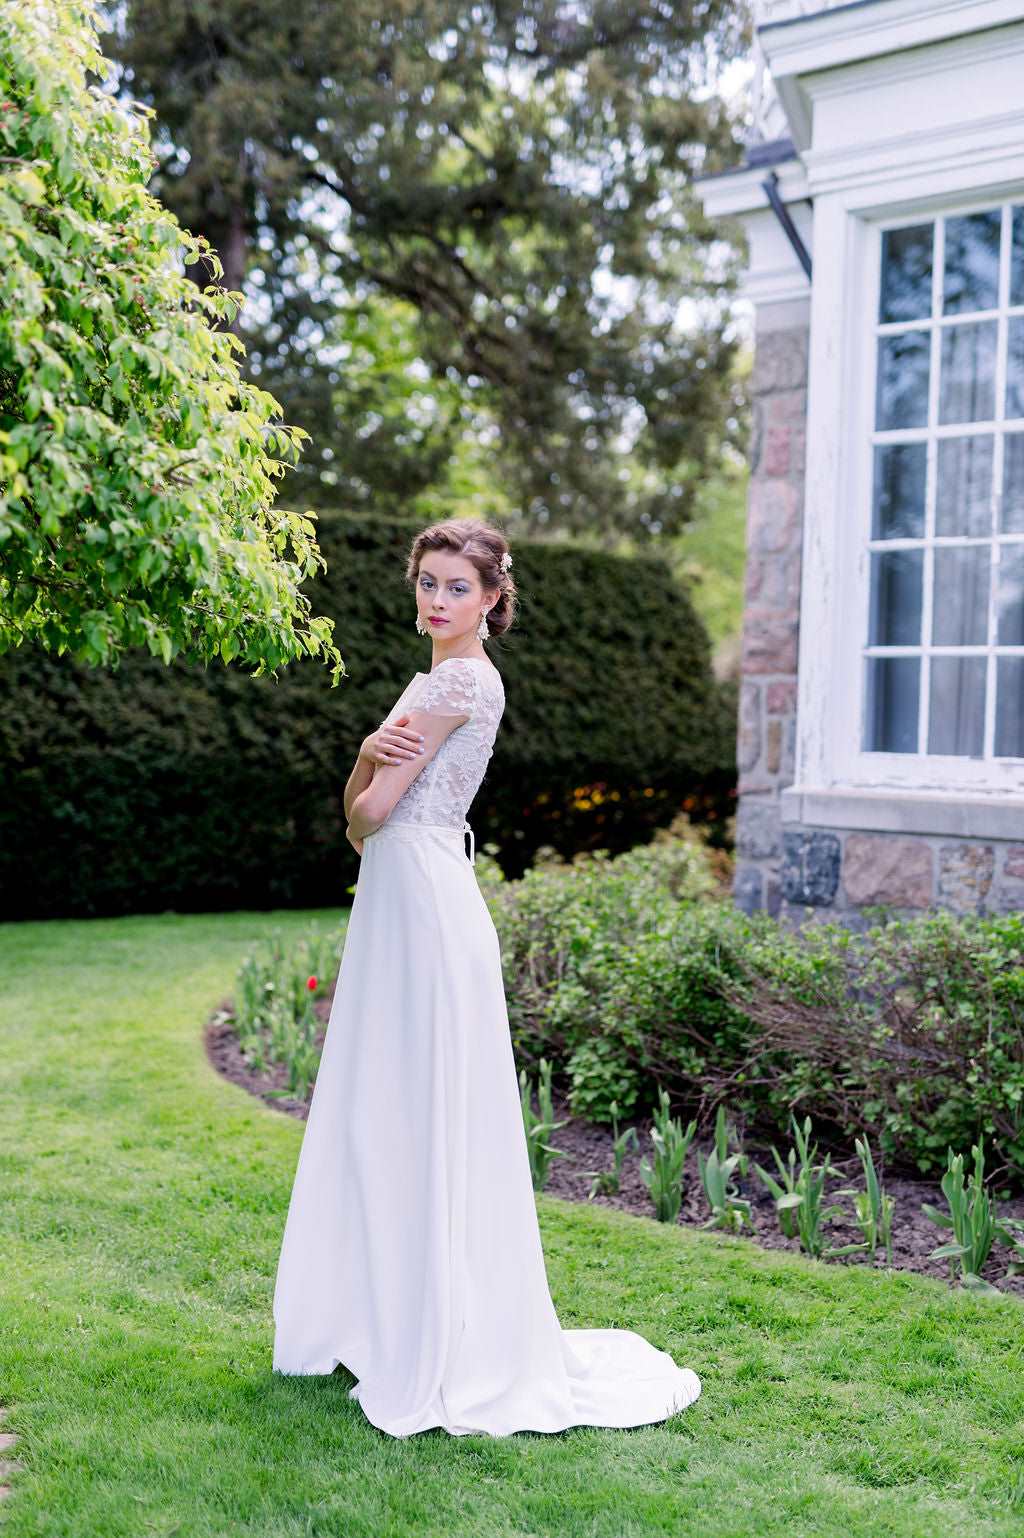 Off the rack Canadian wedding dresses. Timeless cap sleeve A line bridal gown. Custom made by Catherine Langlois. Shop our local Toronto bridal boutique.